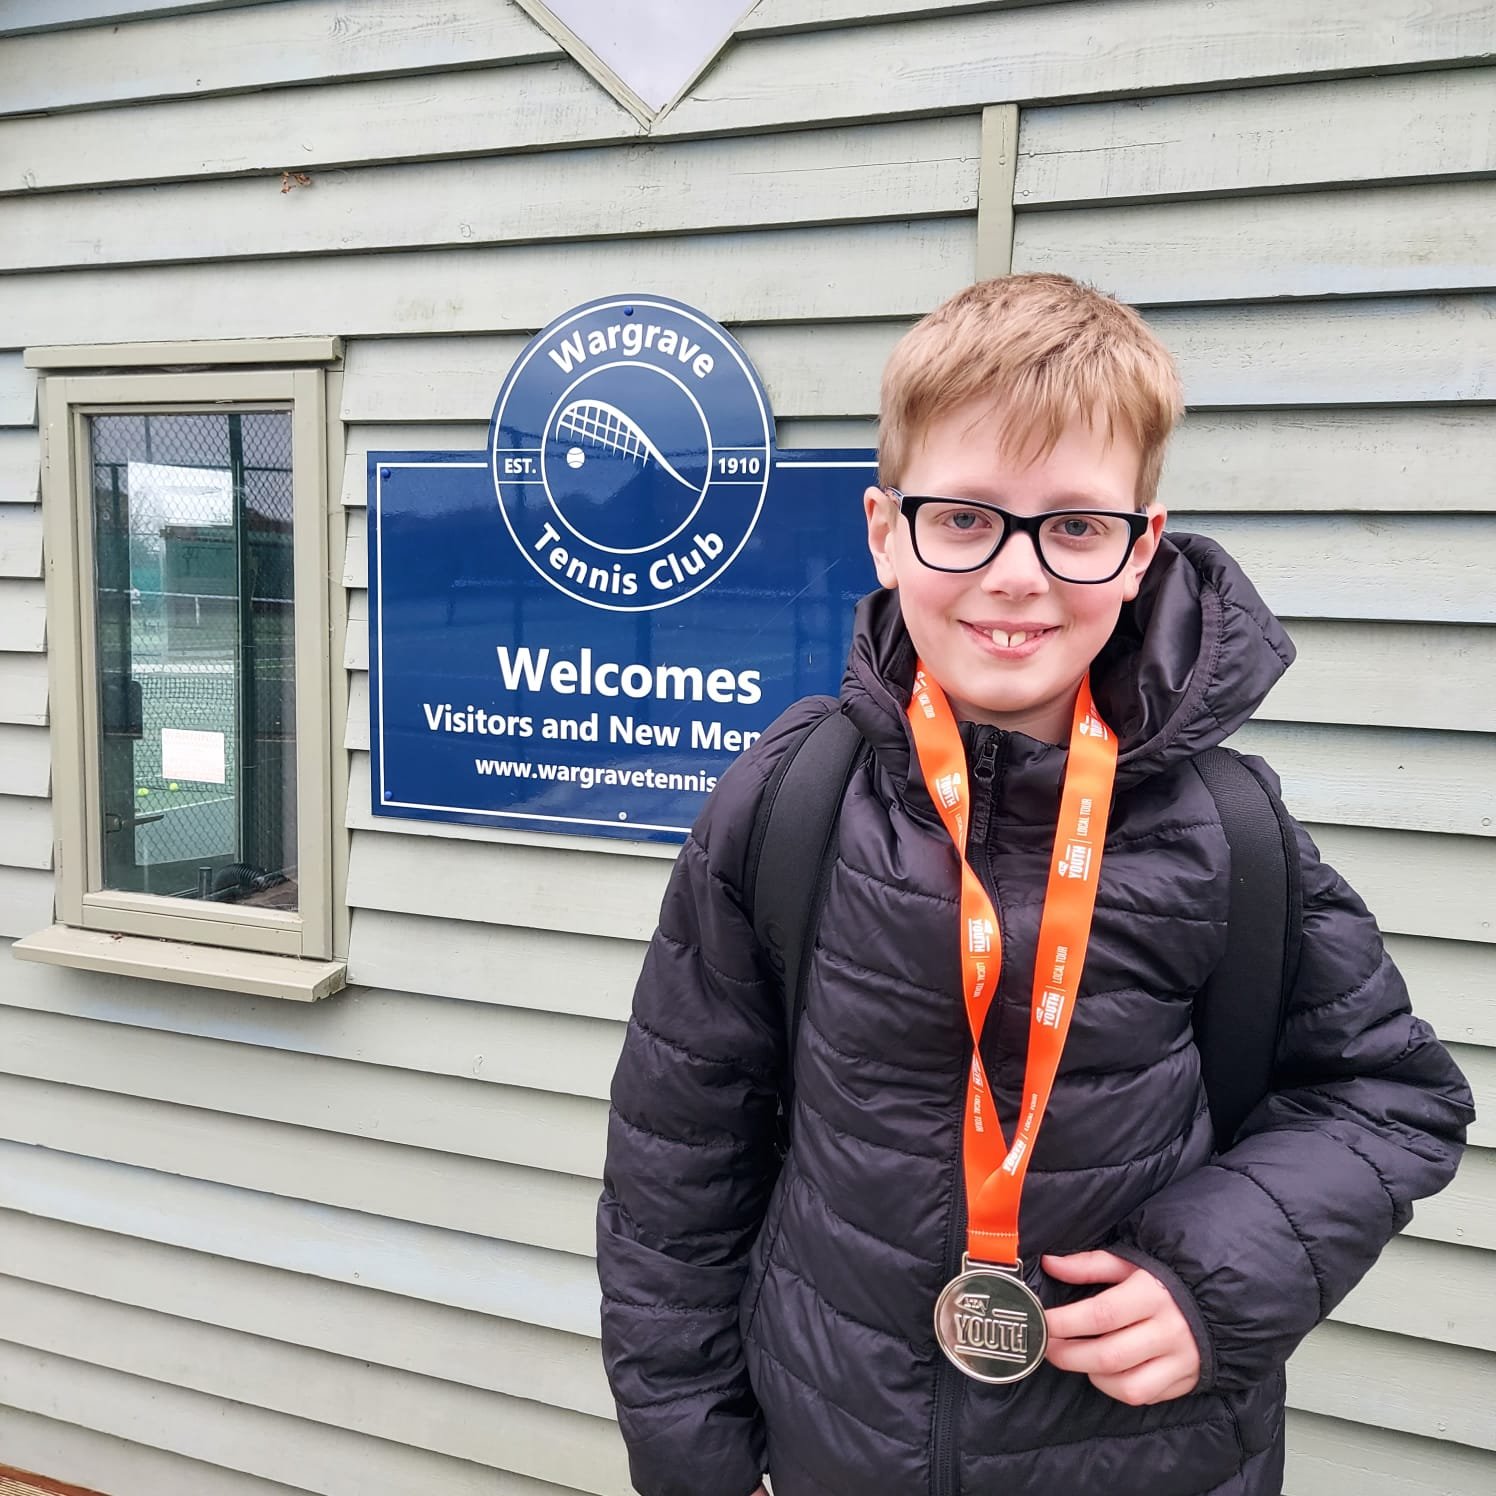 🎾👟 Our boy rocked the Wargrave 11&amp;U boys tournament last Friday, clinching the runner-up spot! 🥈🌟 We're beaming with pride at his hard work and determination! 🙌 Keep shining, champ! 🎉 🎾
#TennisProudParents #RunnerUpStar #buckstennis #briti